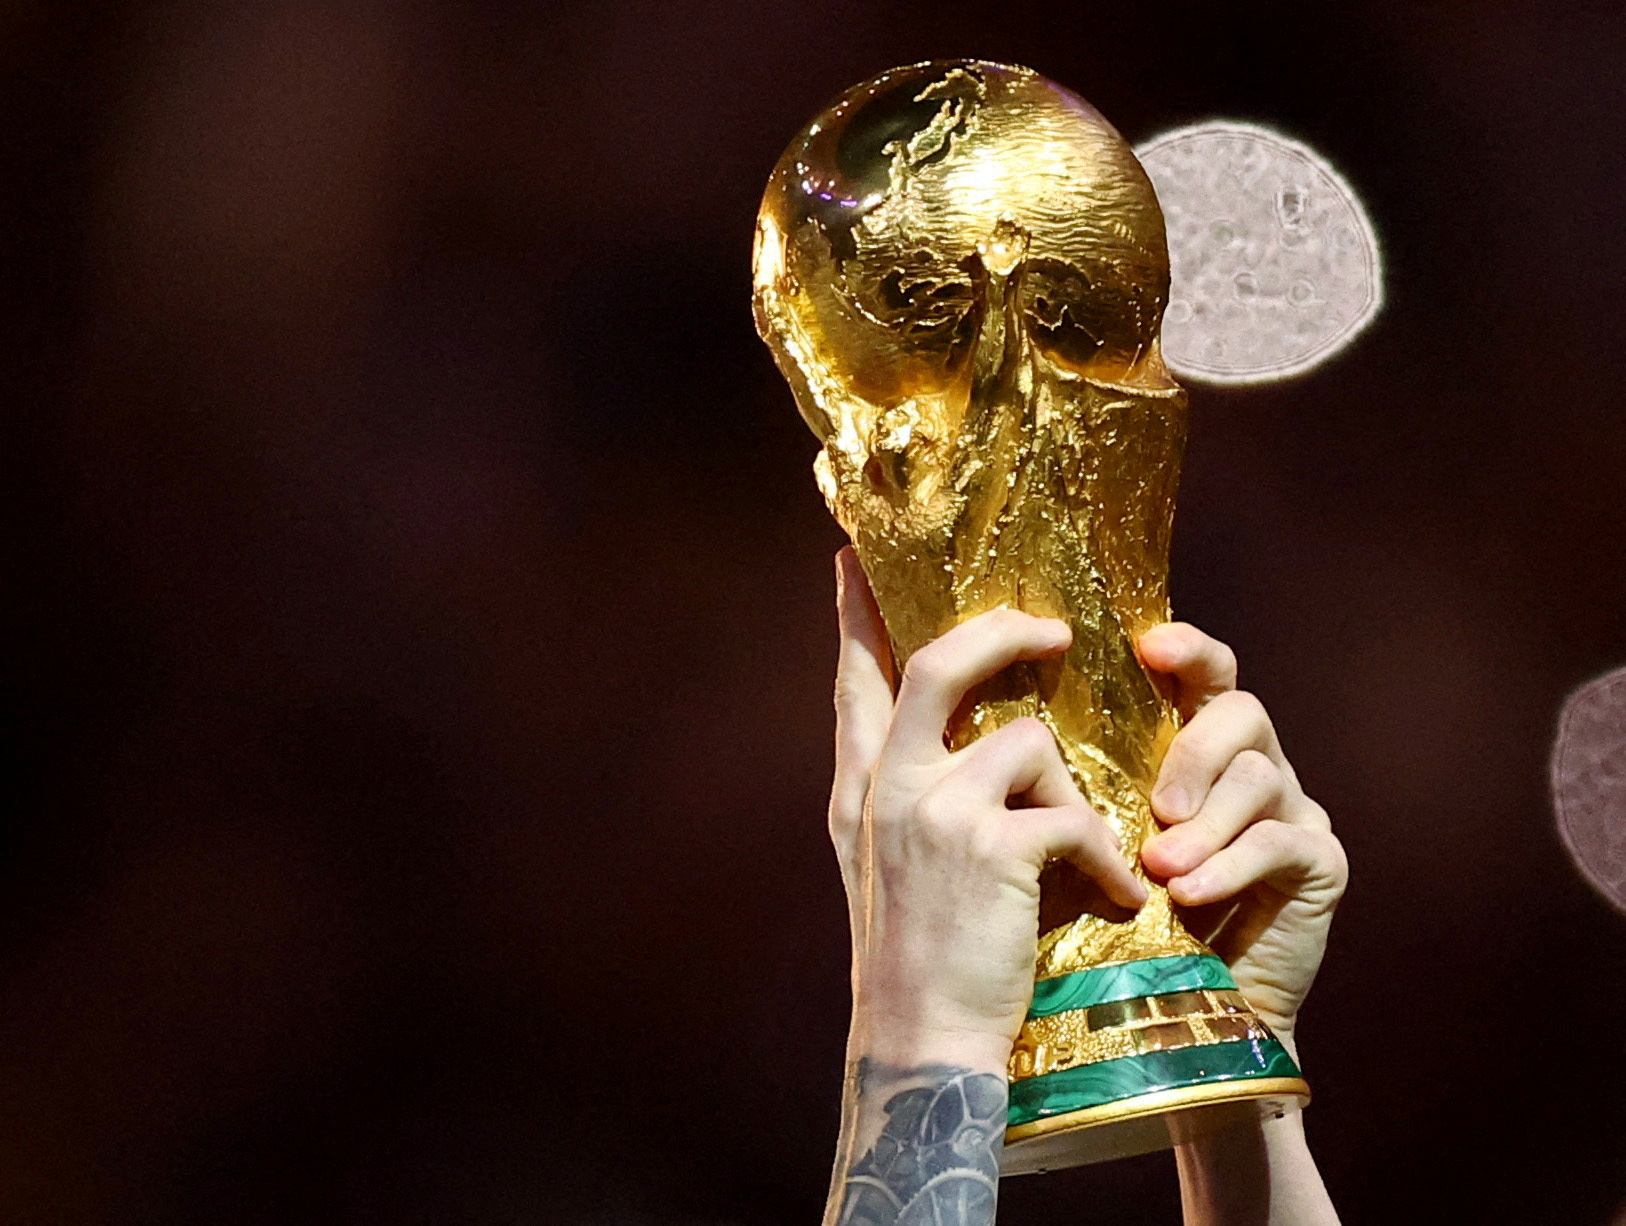 Where will the 2026 World Cup be held, how many teams will play, and what  is the format?